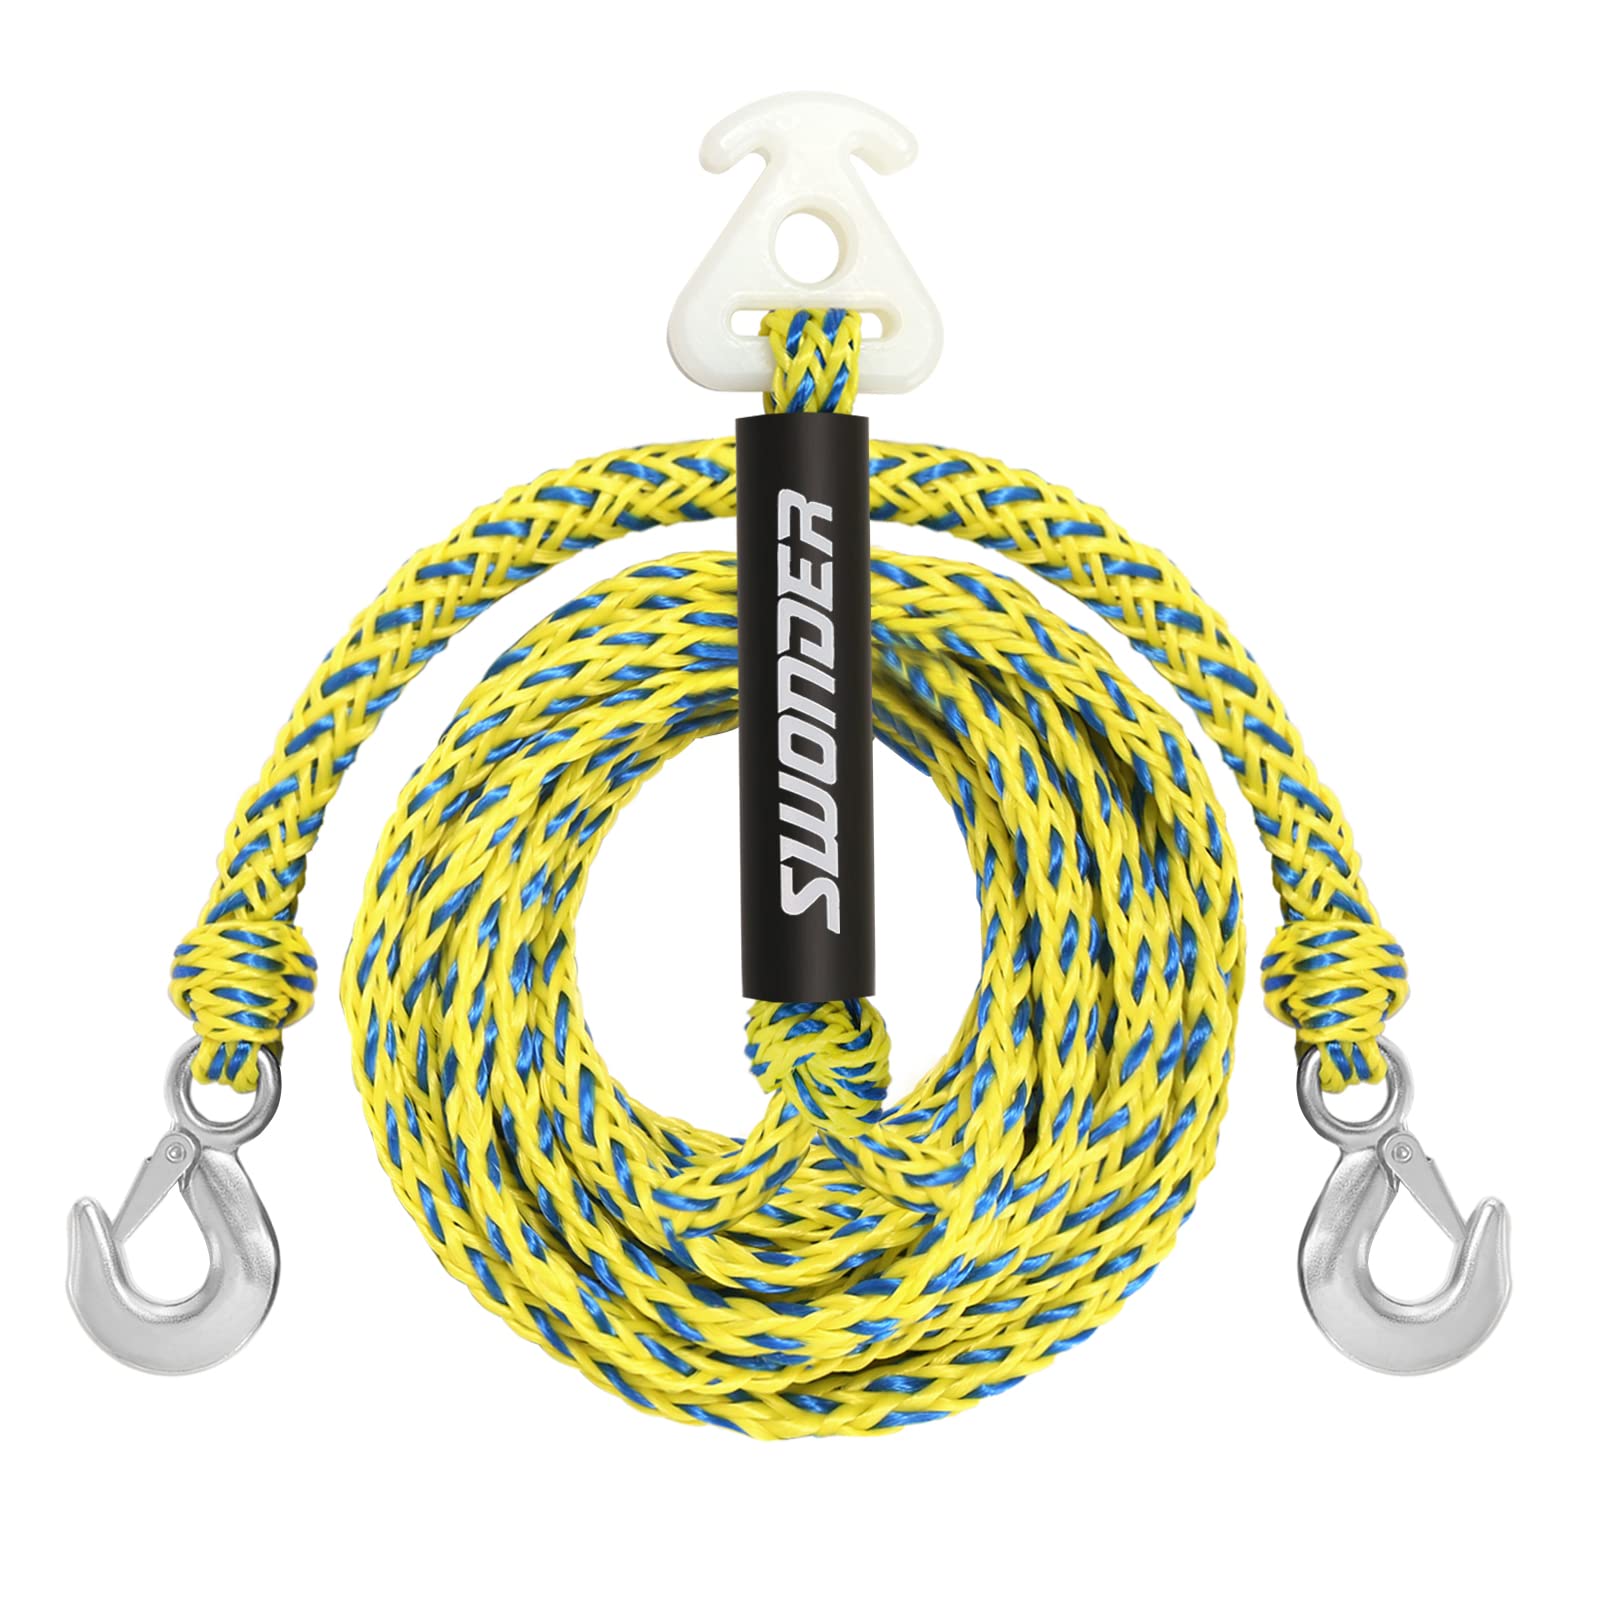 Swonder Boat Tow Harness for Tubing, 16ft Boat Tow Rope for Tubing